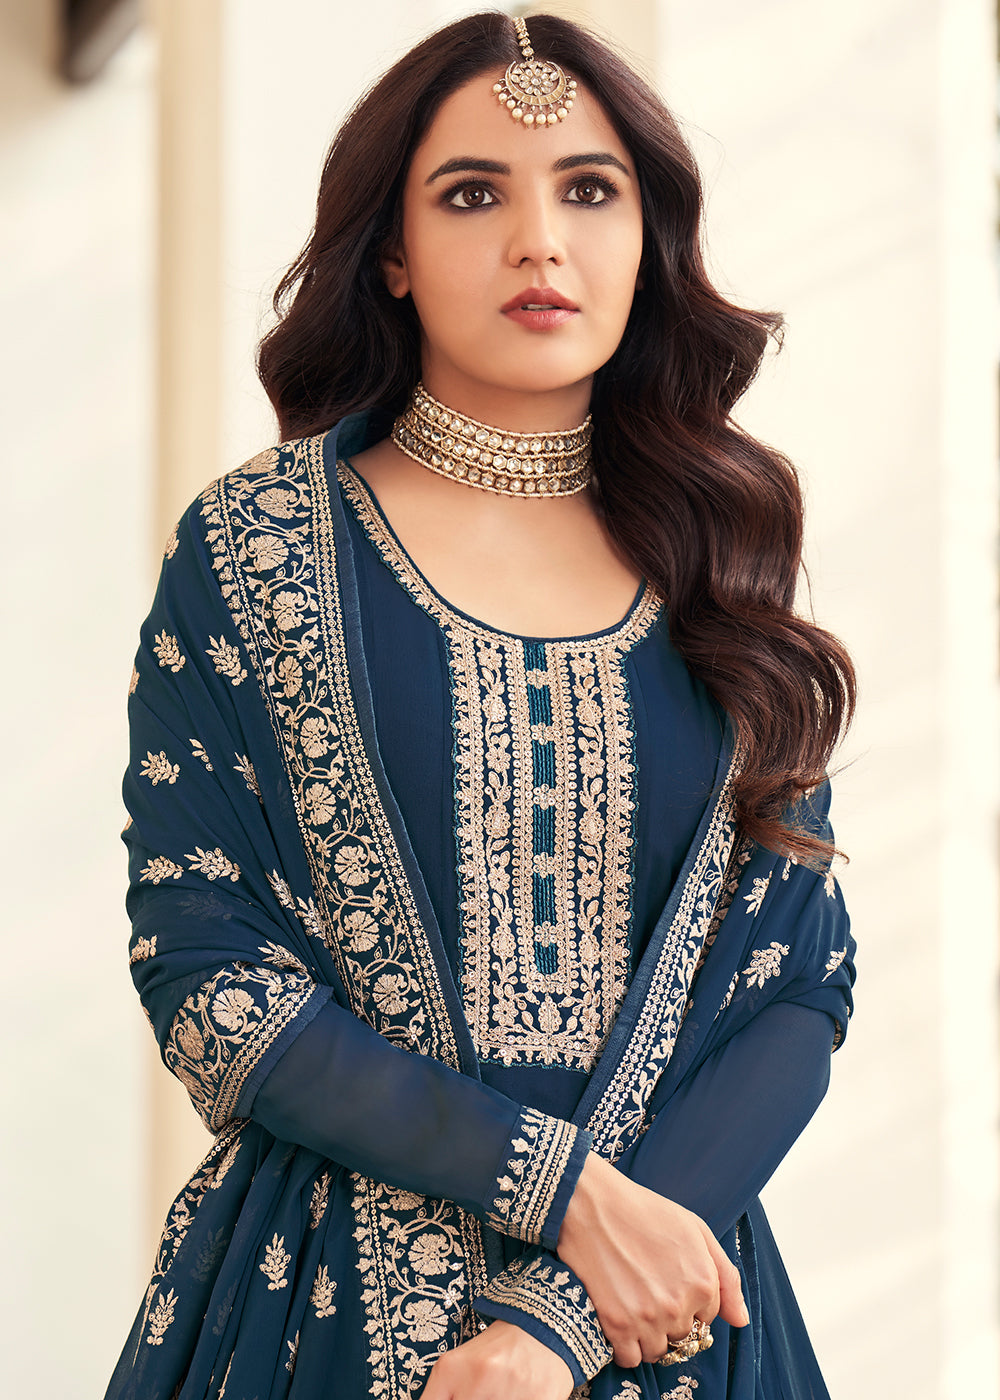 Buy Now Georgette Navy Blue Embroidered Indian Long Anarkali Dress Online in USA, UK, Australia, New Zealand, Canada & Worldwide at Empress Clothing.